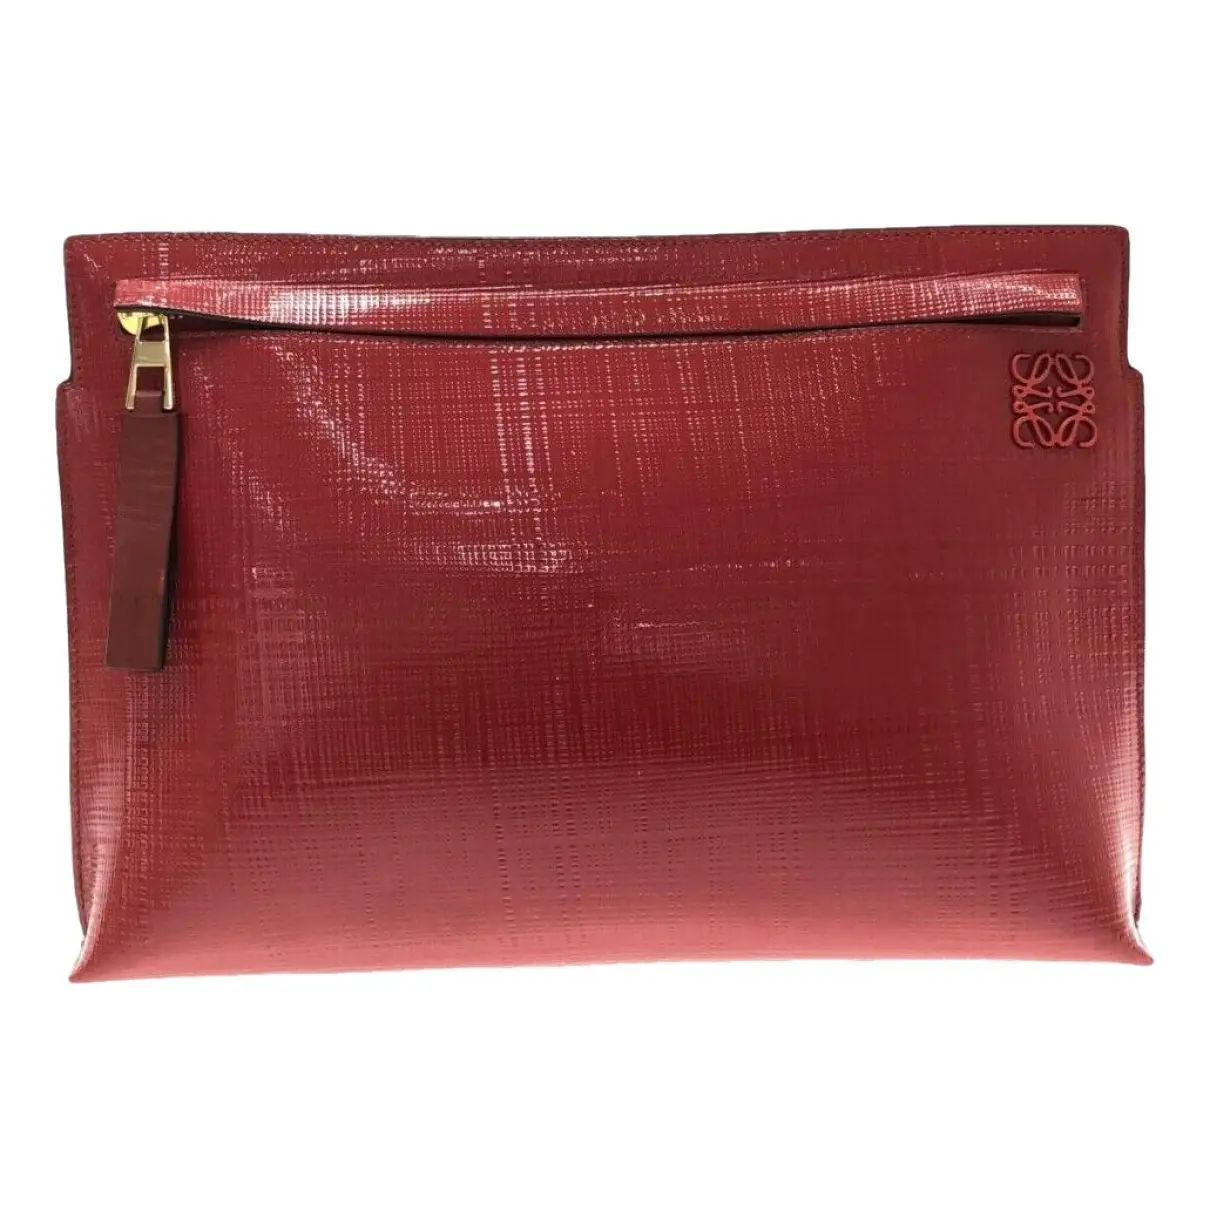 T Pouch leather clutch bag